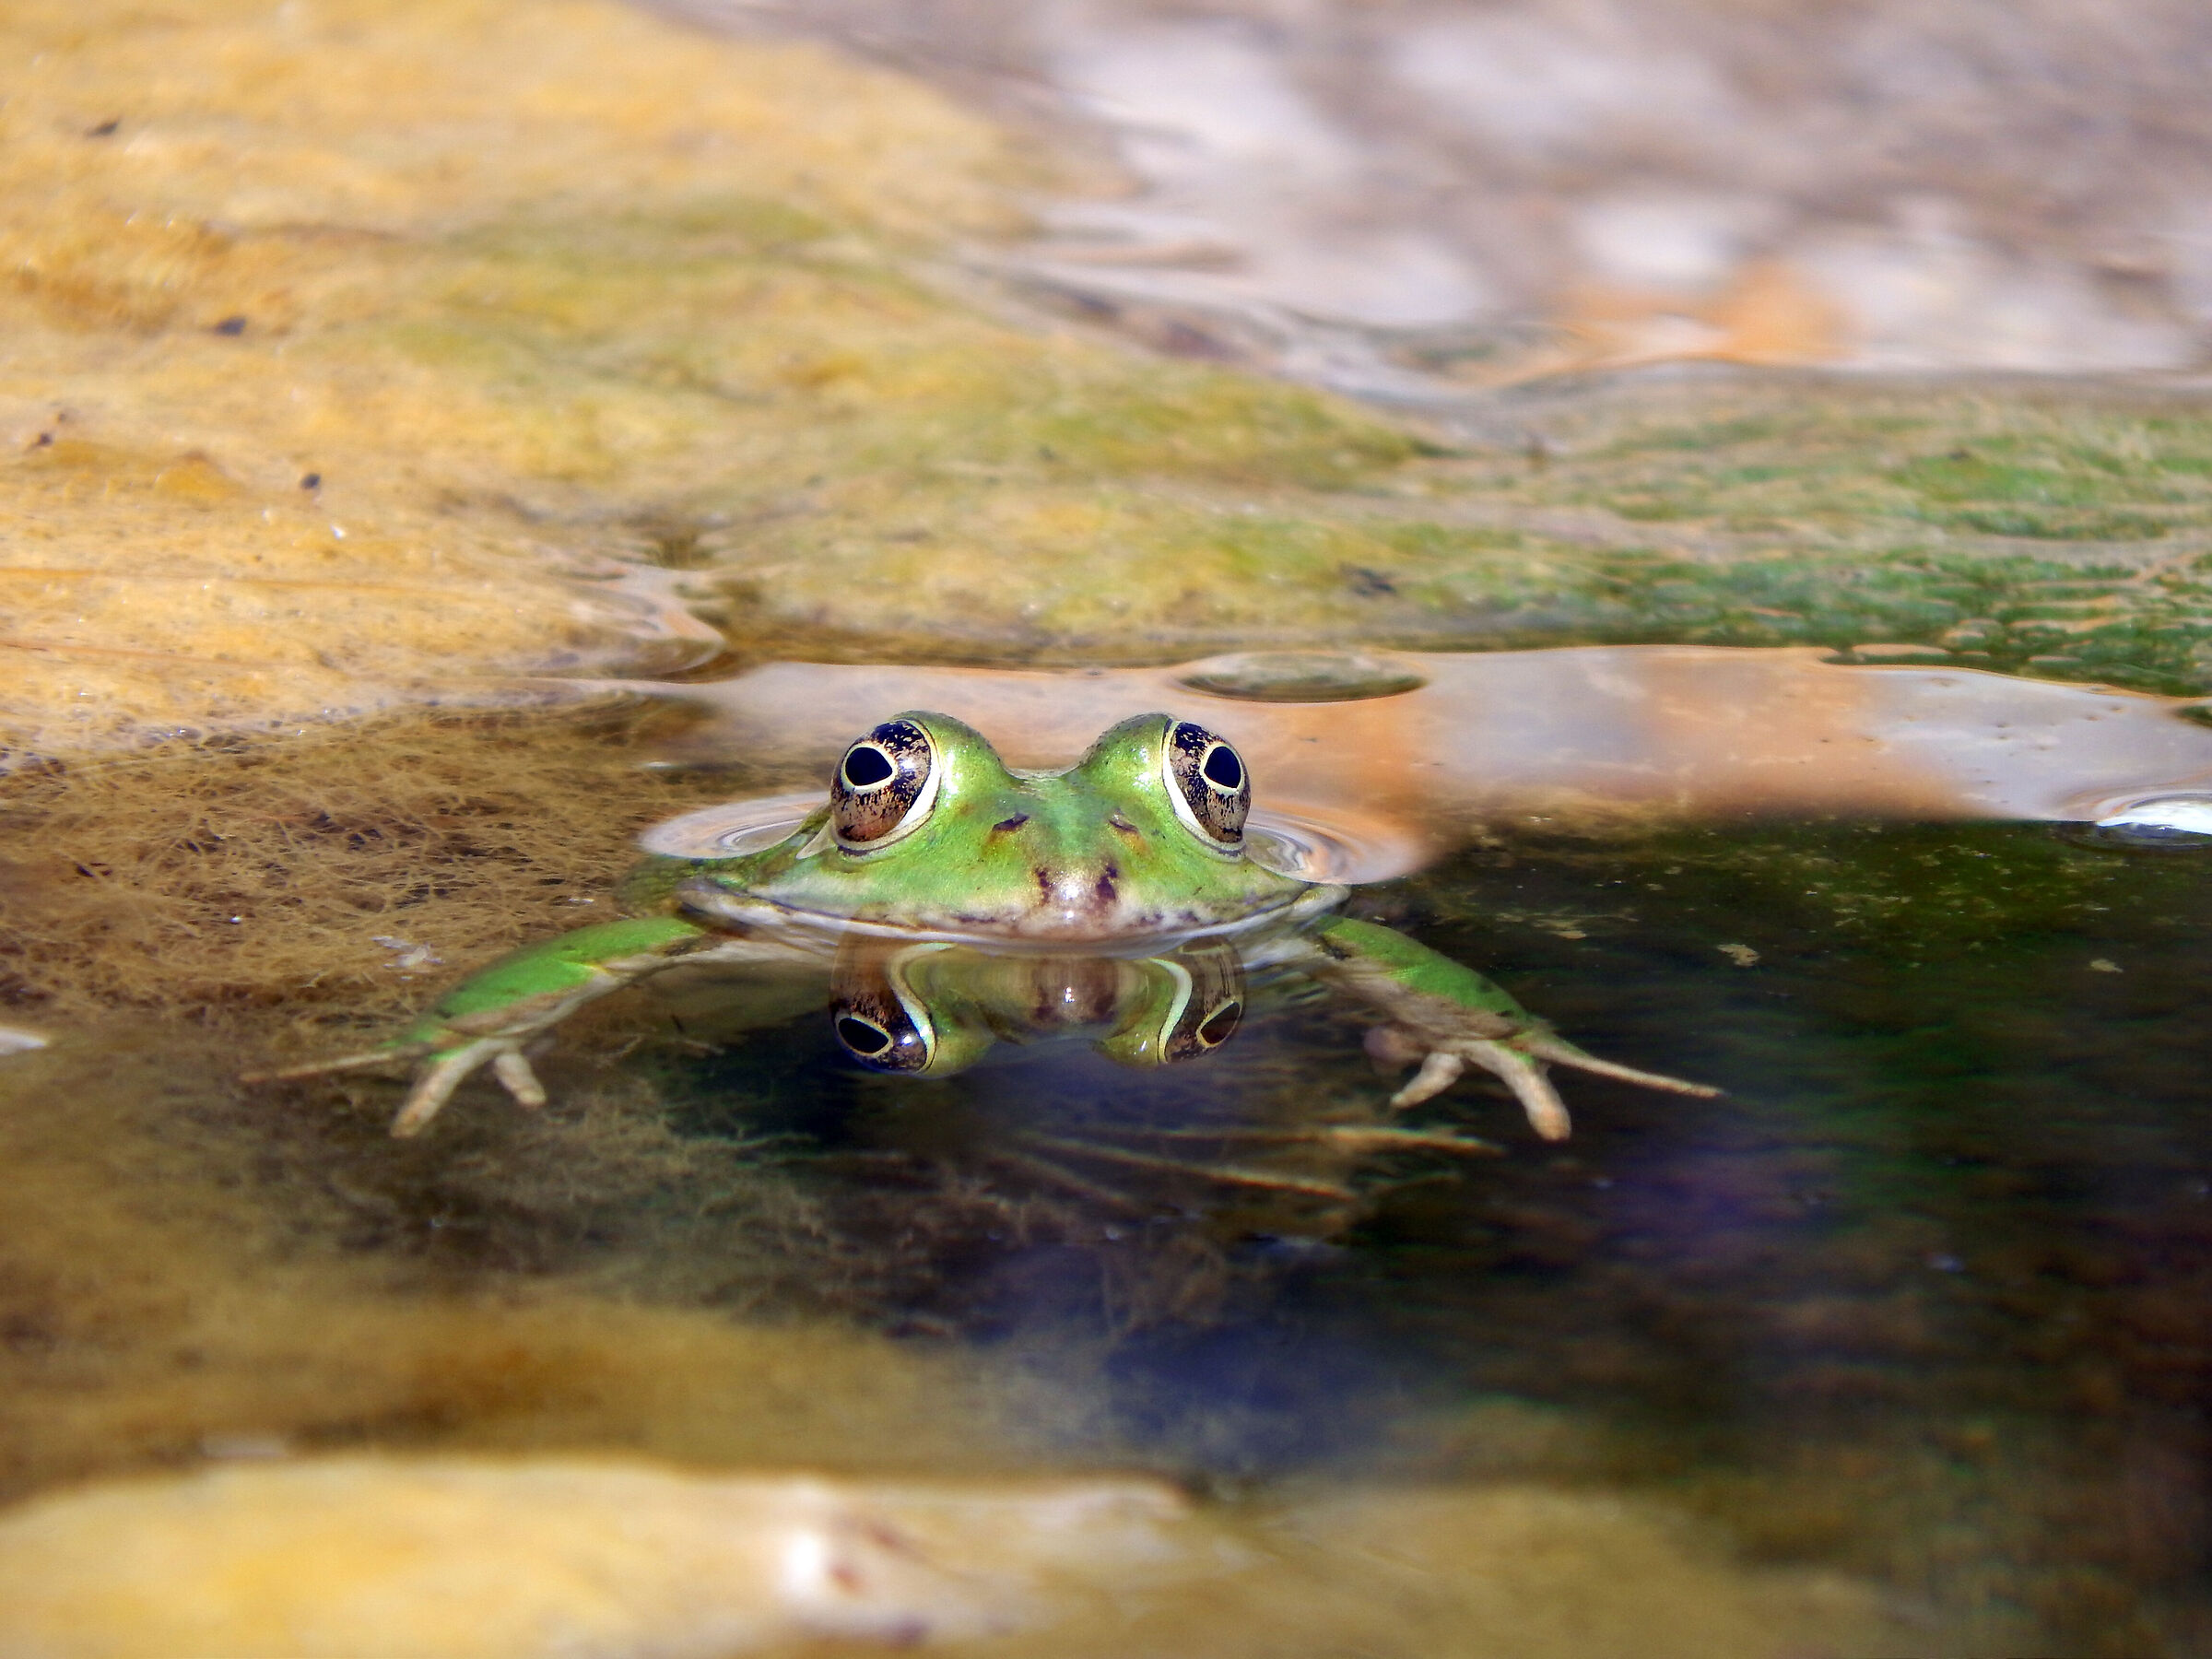 Frog in the water...